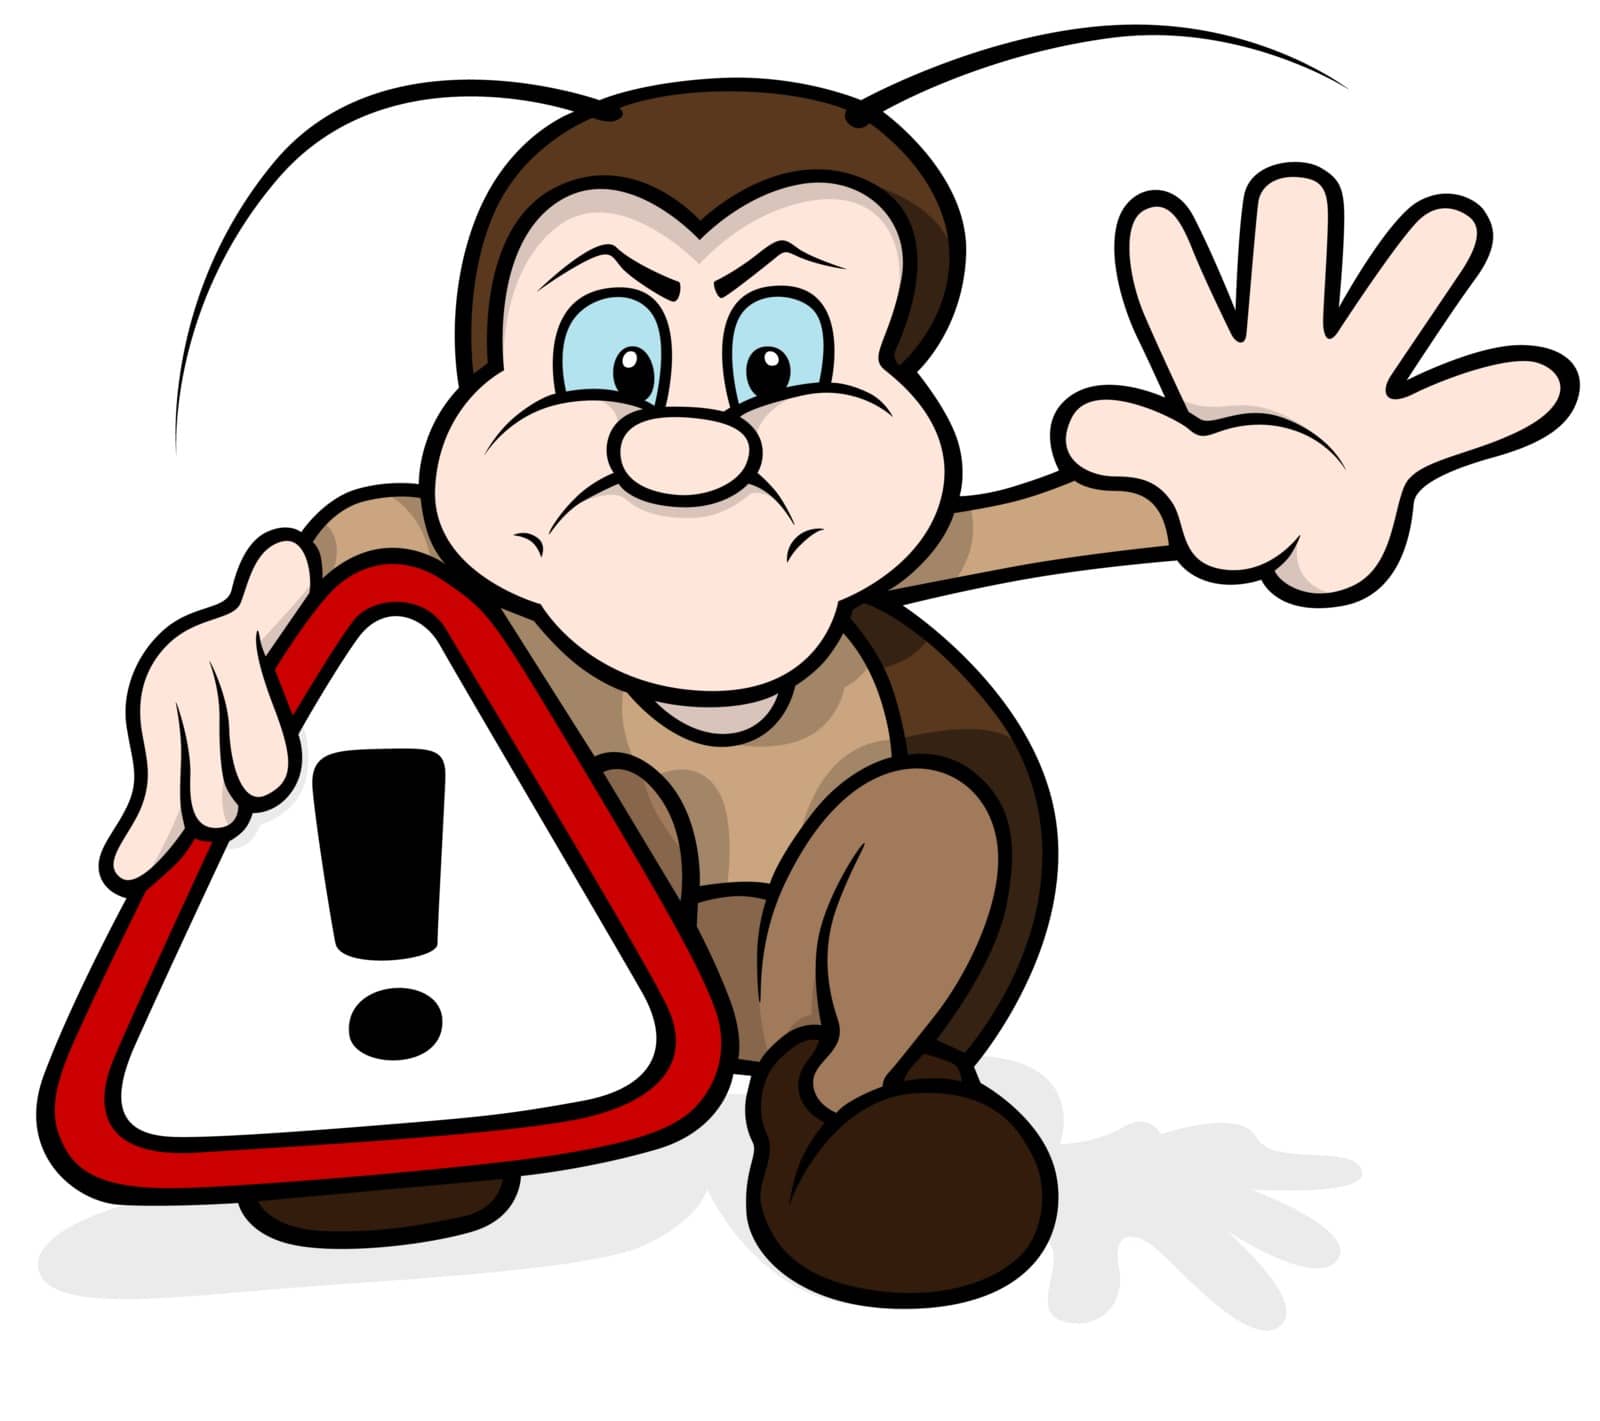 Bug and Alert Sign - Colored Cartoon illustration, Vector